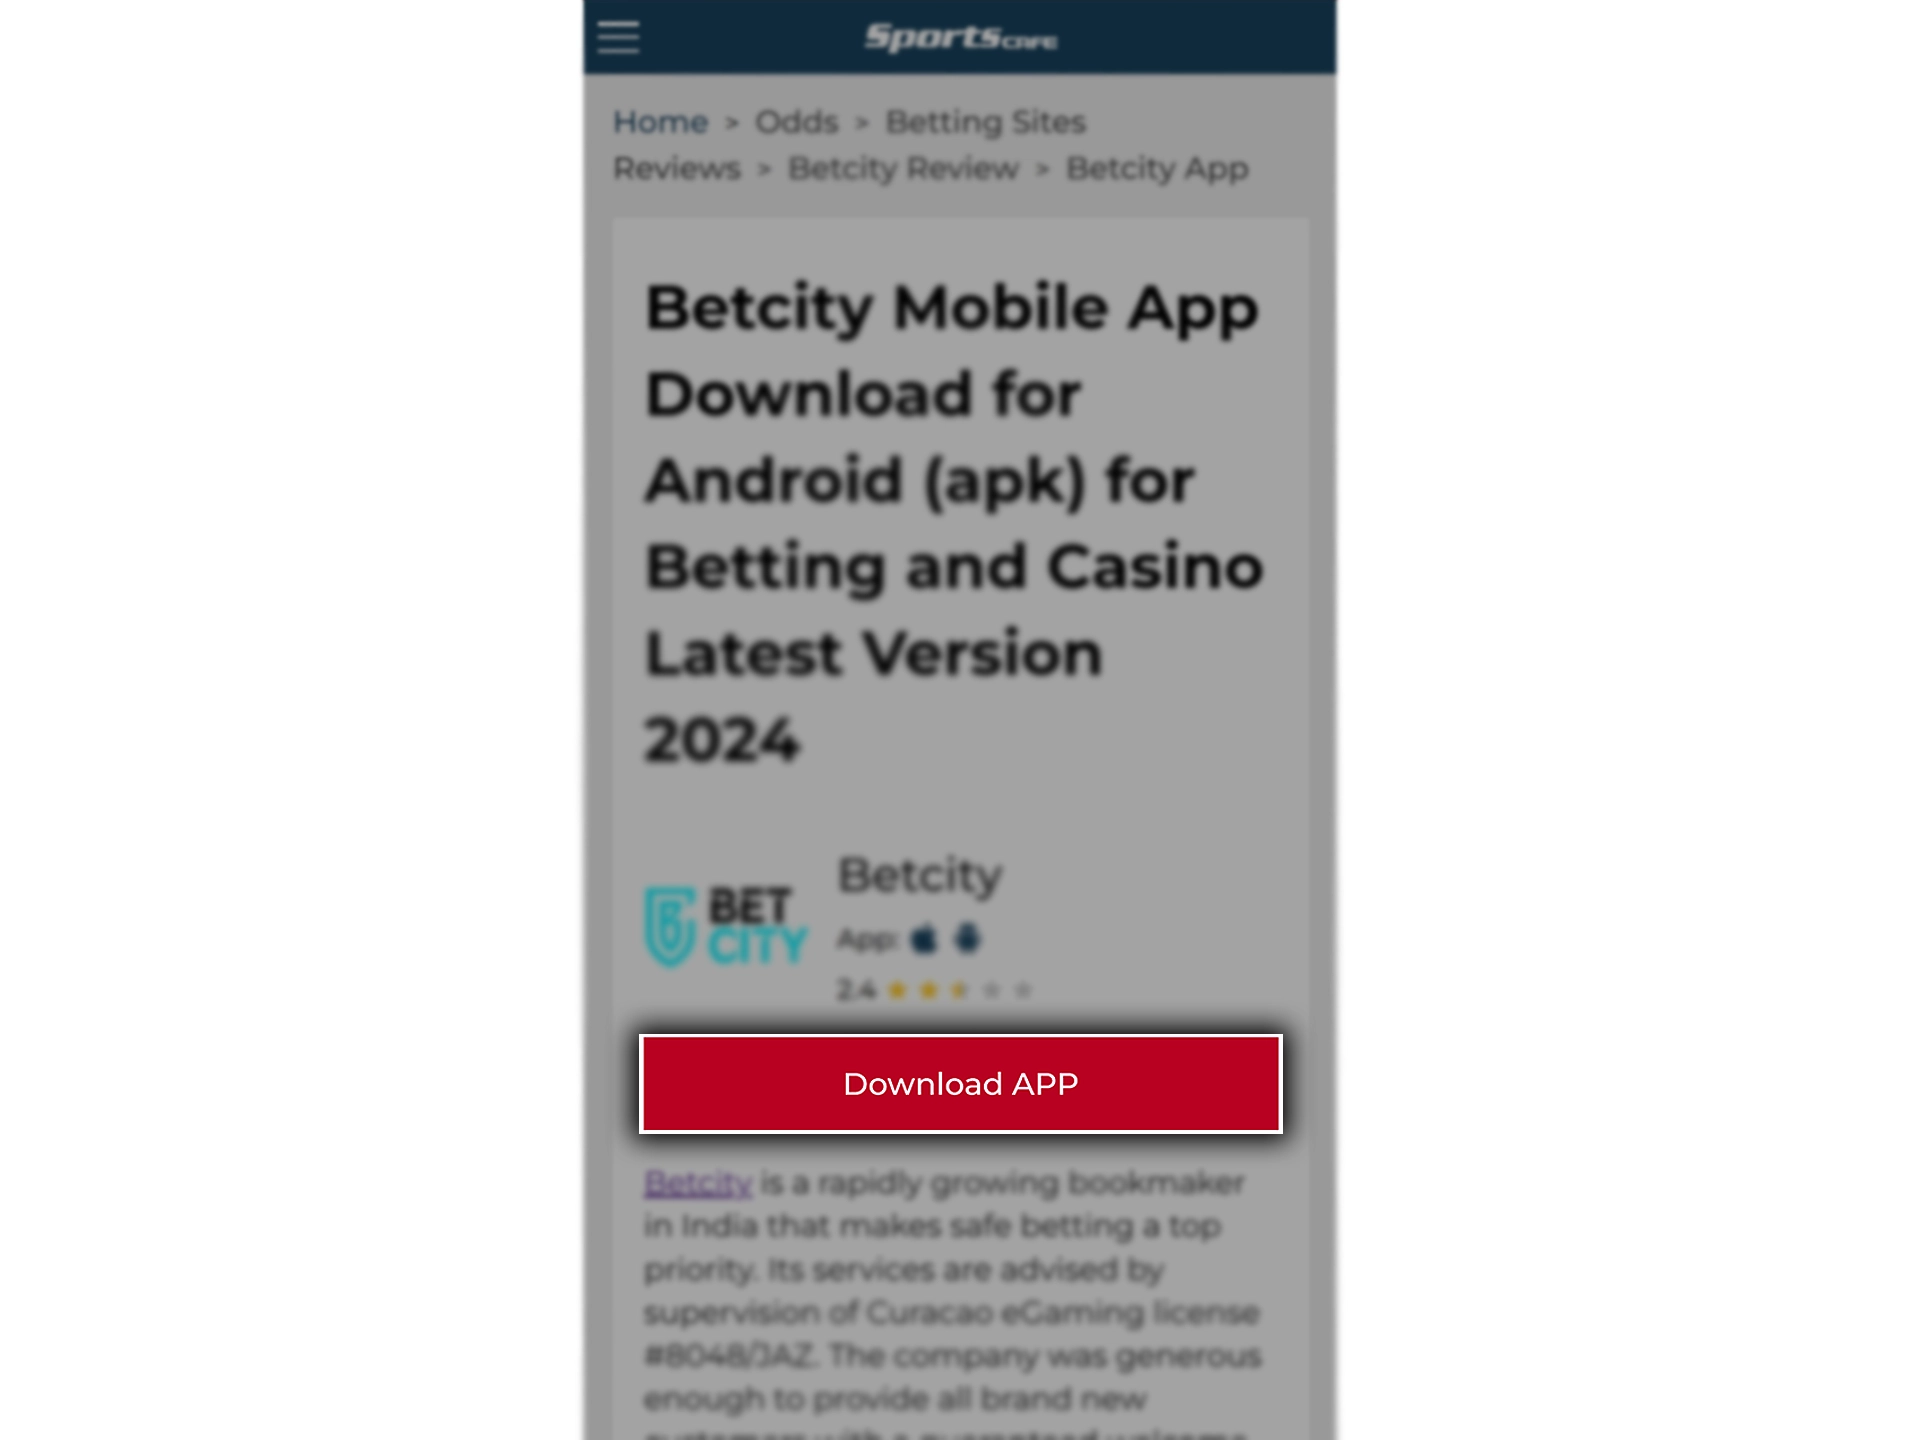 Follow the link at the top of the article to download the Betcity app installation file.